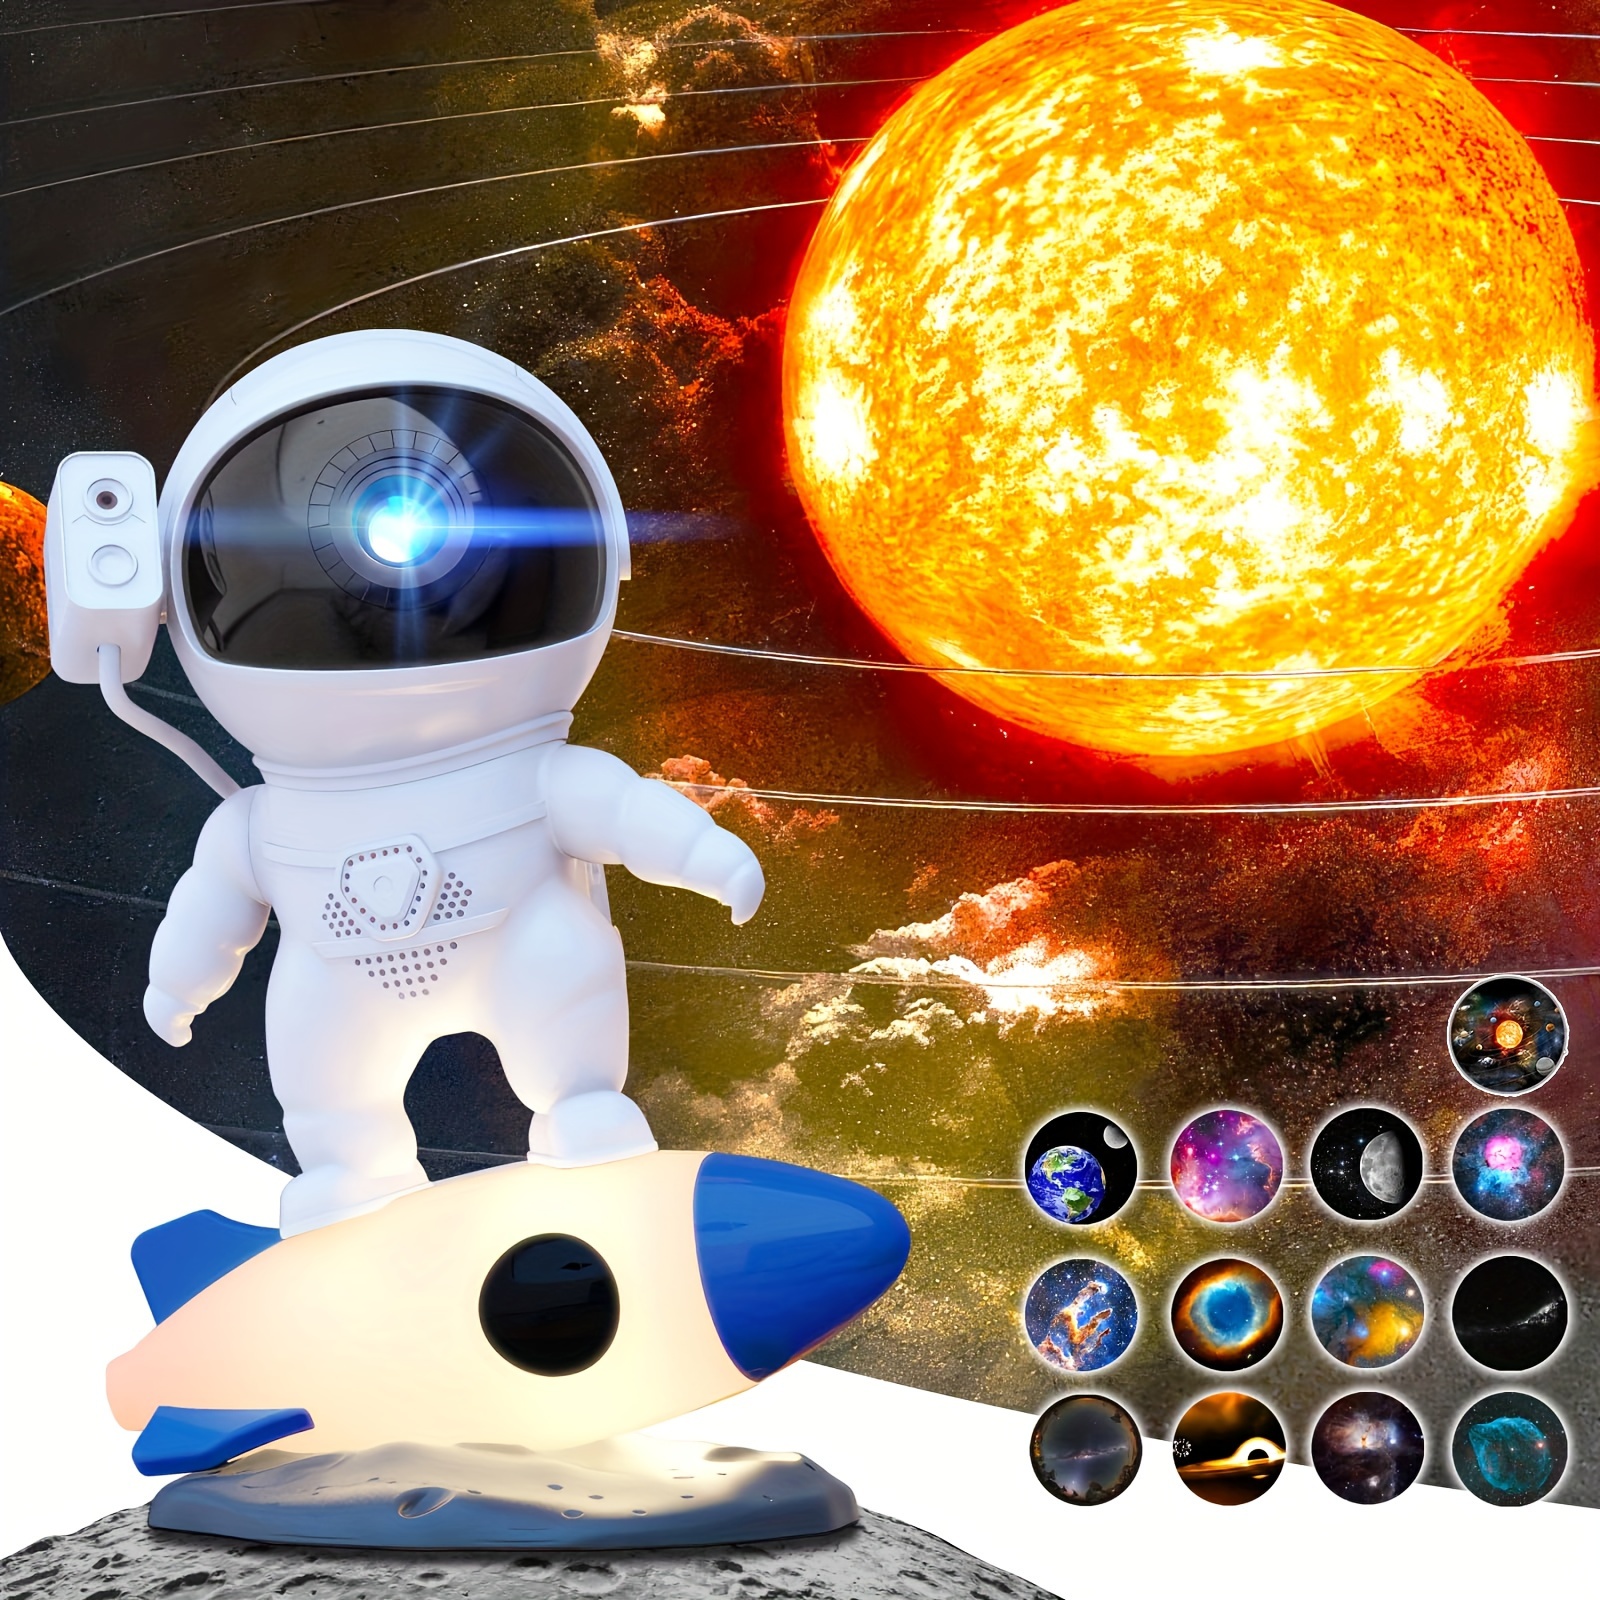 

1pc 360° Adjustable Rocket Astronaut Star Projector, Nebula Projector With 13 Unique Film Discs, Rocket Night Light With 10 Colors For Room Decor